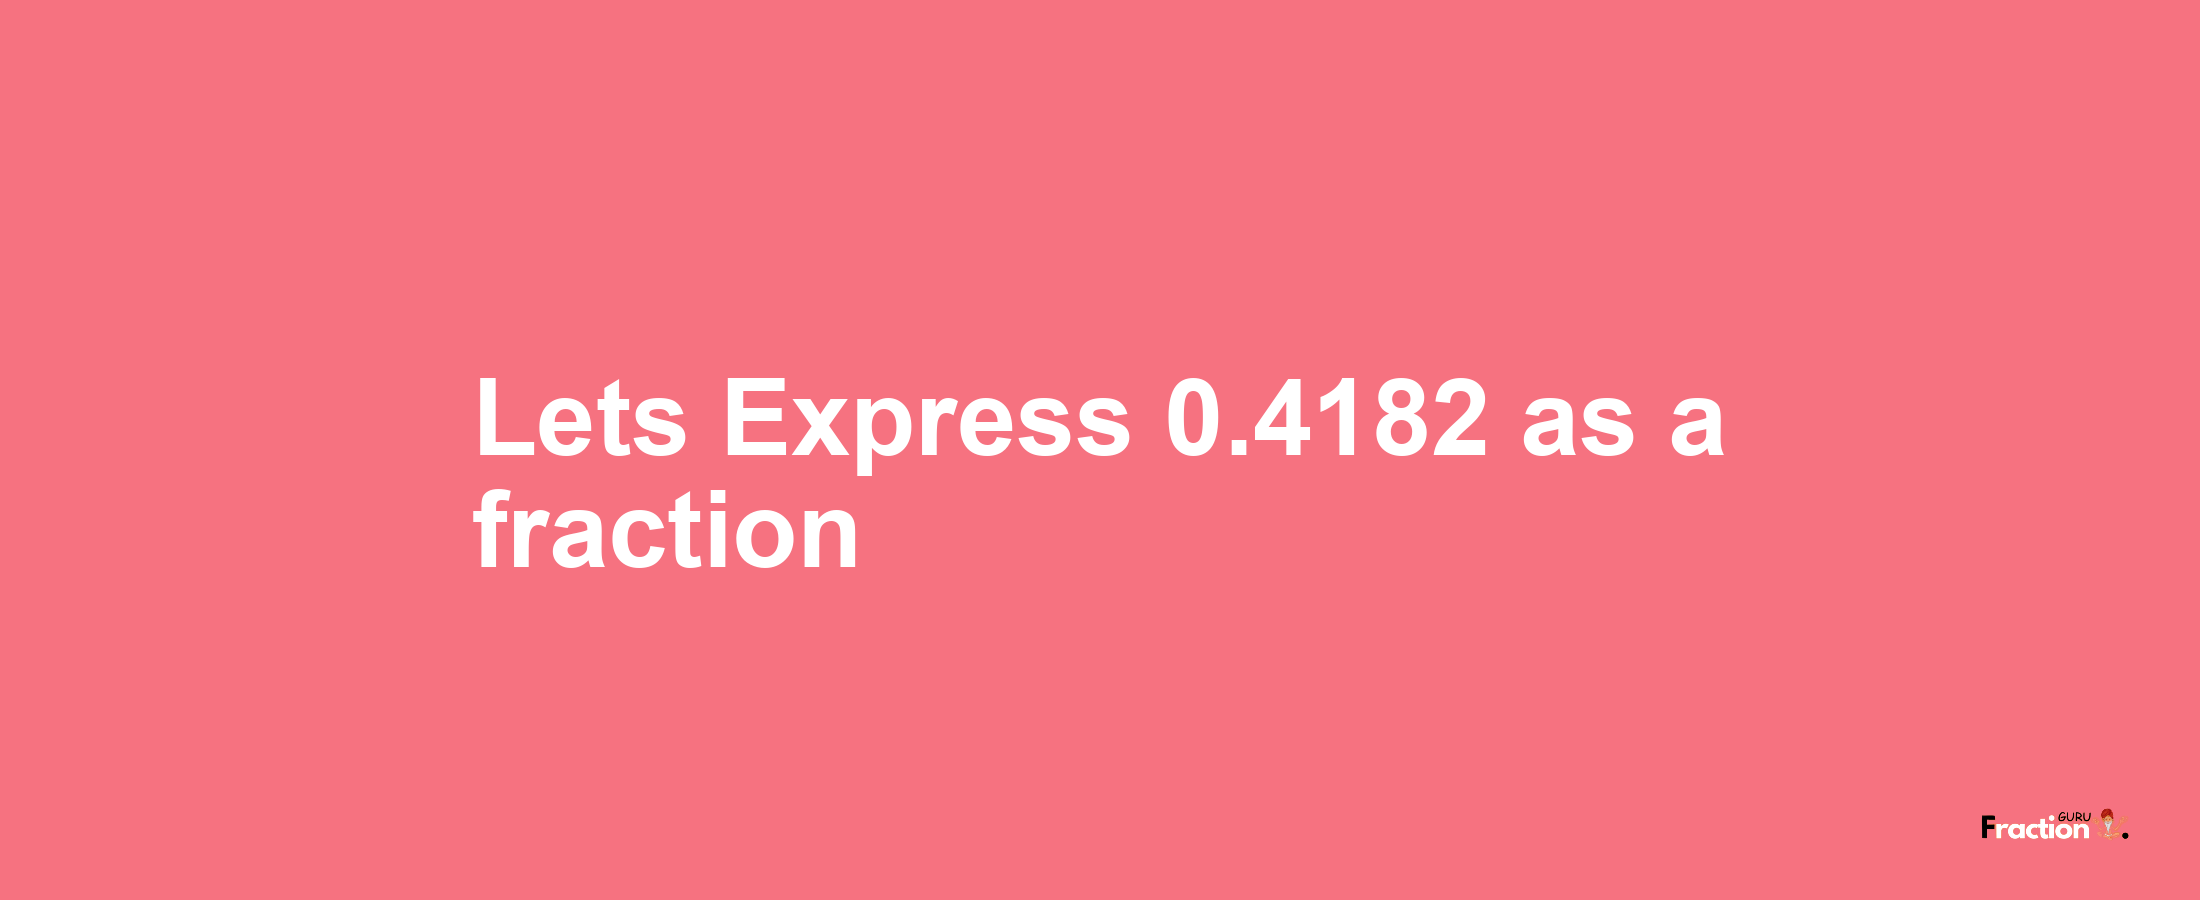 Lets Express 0.4182 as afraction